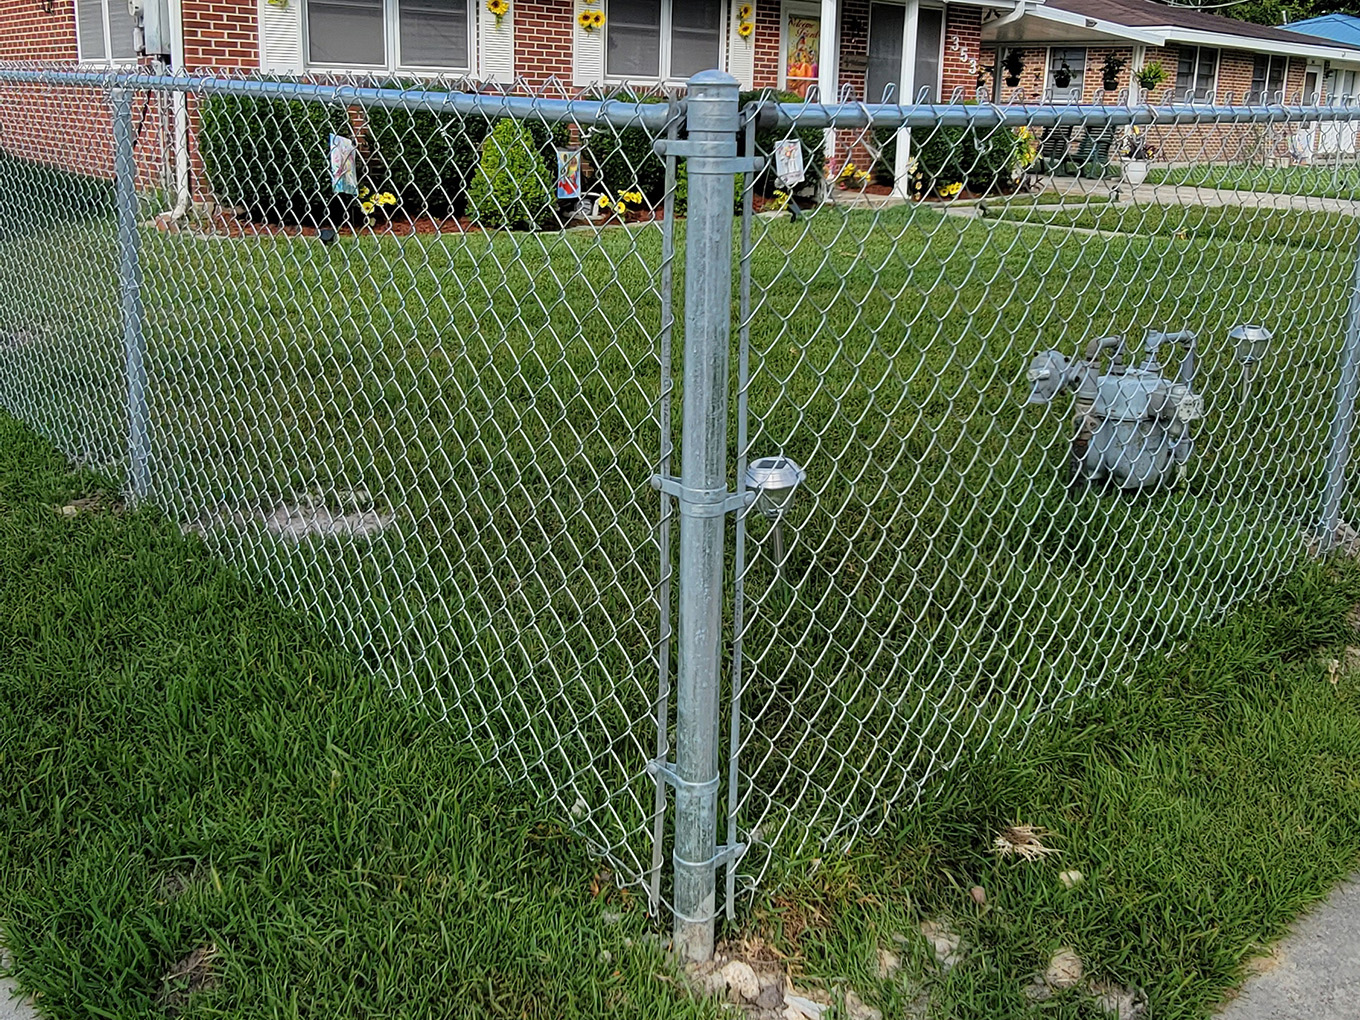 Galvanized residential chain link fence contractor located in Slidell Lousiana, Louisiana